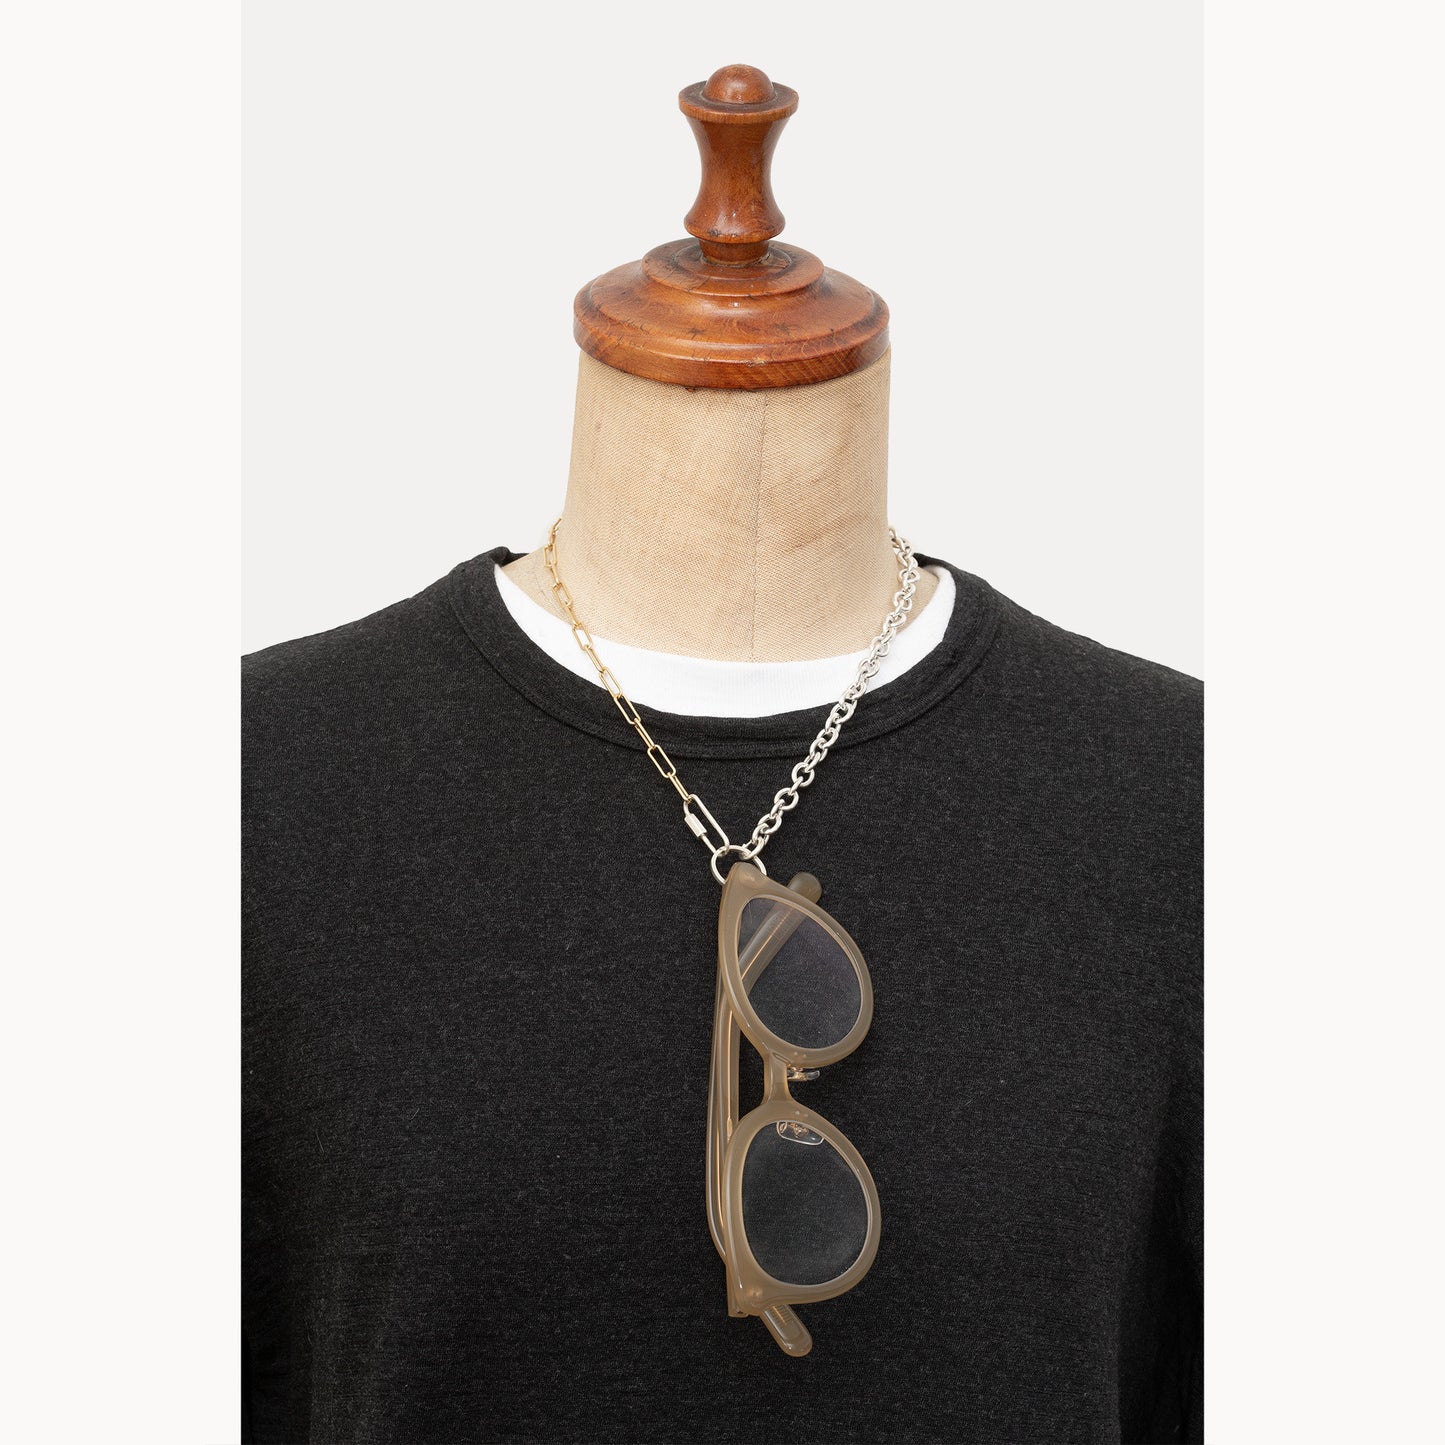 Necklace / Glasses Holder ネックレス / グラスホルダー